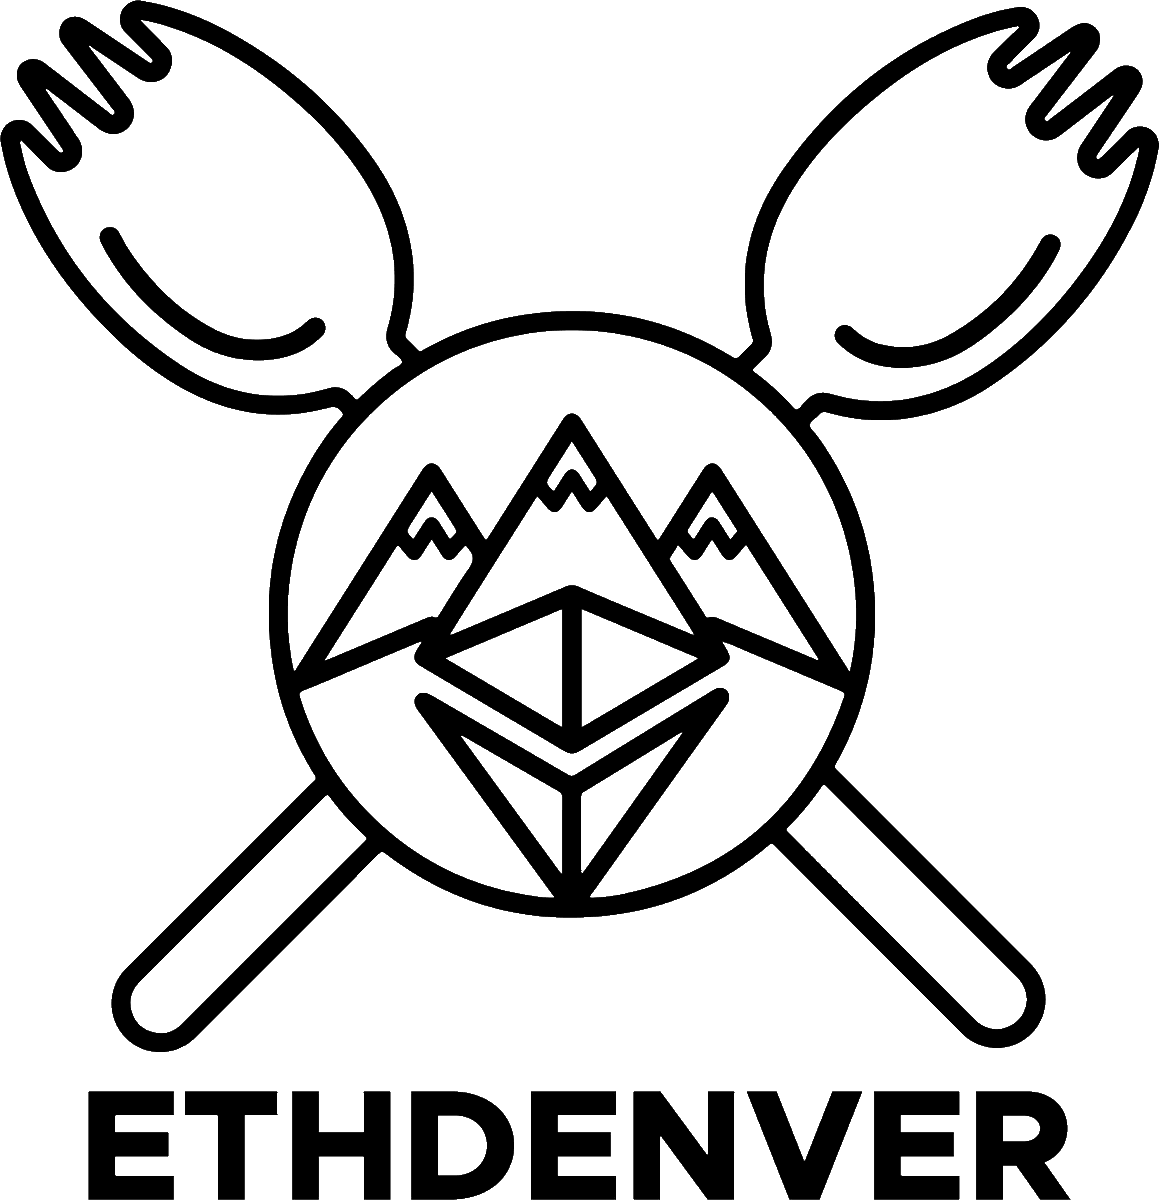 Only a few more weeks until #ETHDenver! Excited to meet and #BUIDL with the #Ethereum community, this year will be one for the books 👀 📚 🤝 #ETHDenver2023 #YearOfTheSpork